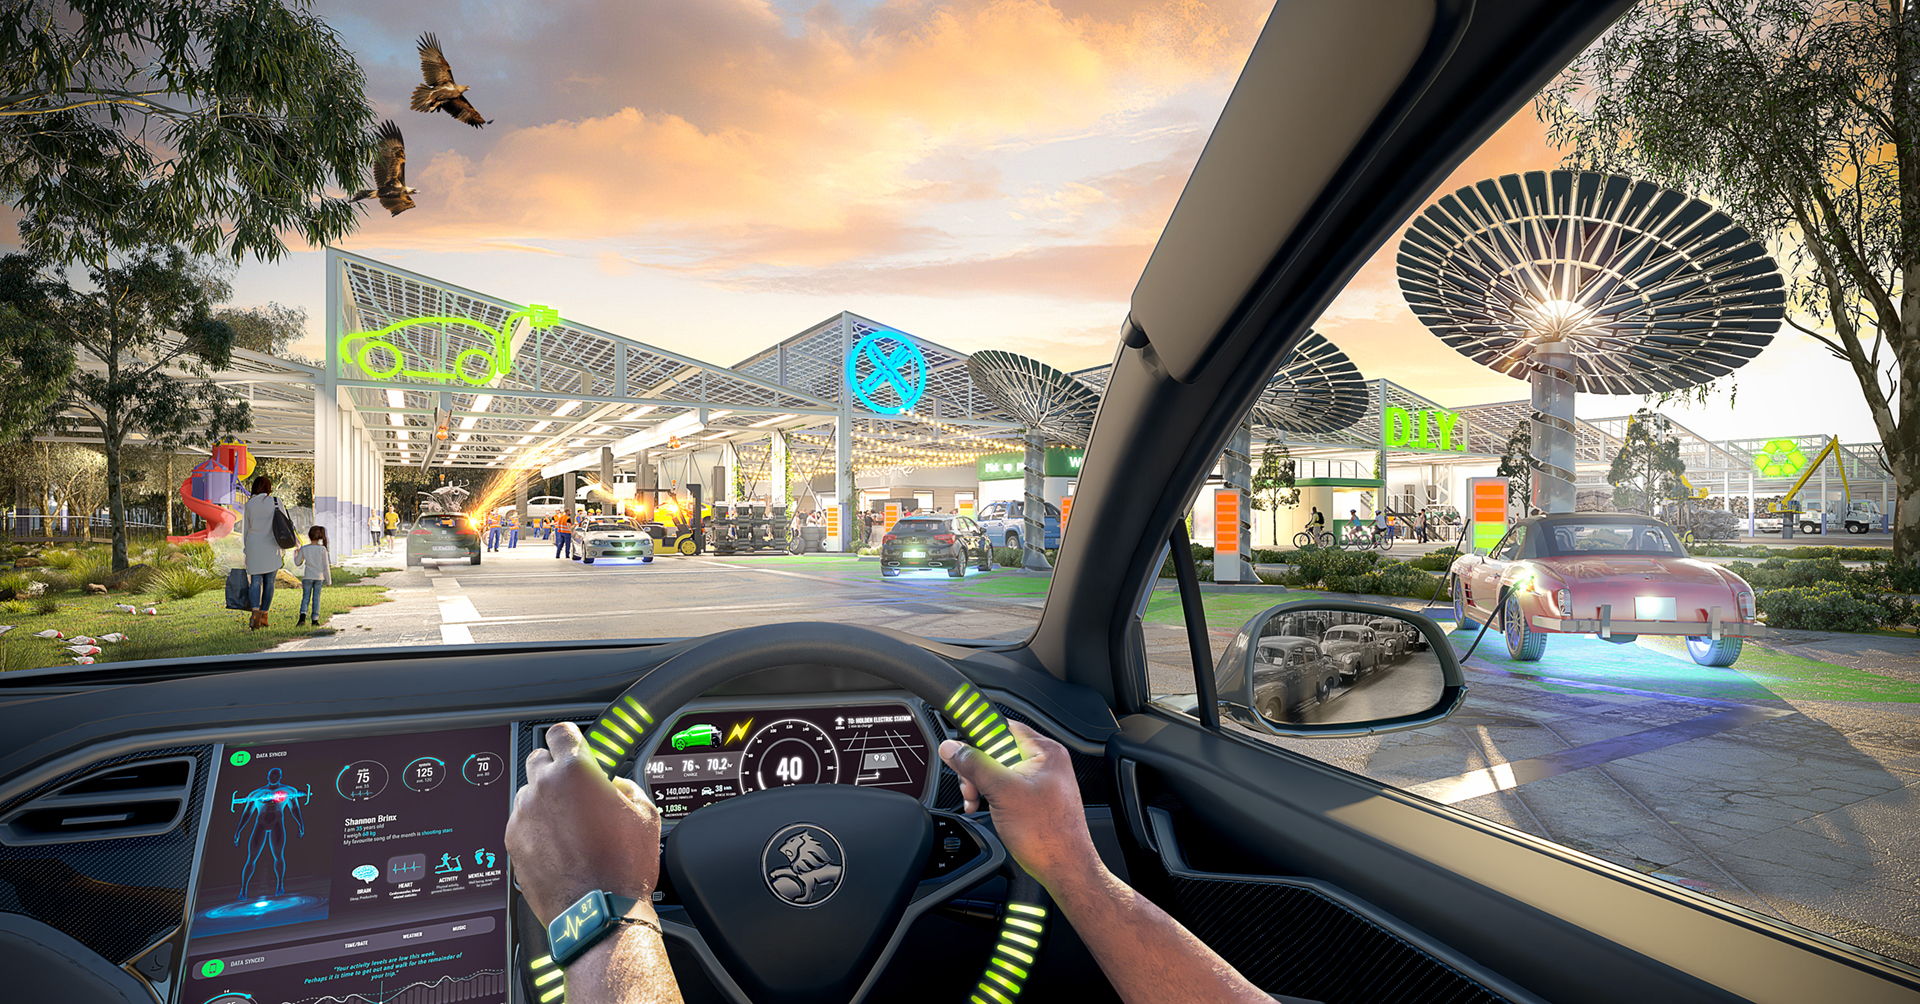 A NEW NORMAL: ELECTRIC CAR CONVERSIONS Presented by Grimshaw X Greenshoot X Greenaway Architects